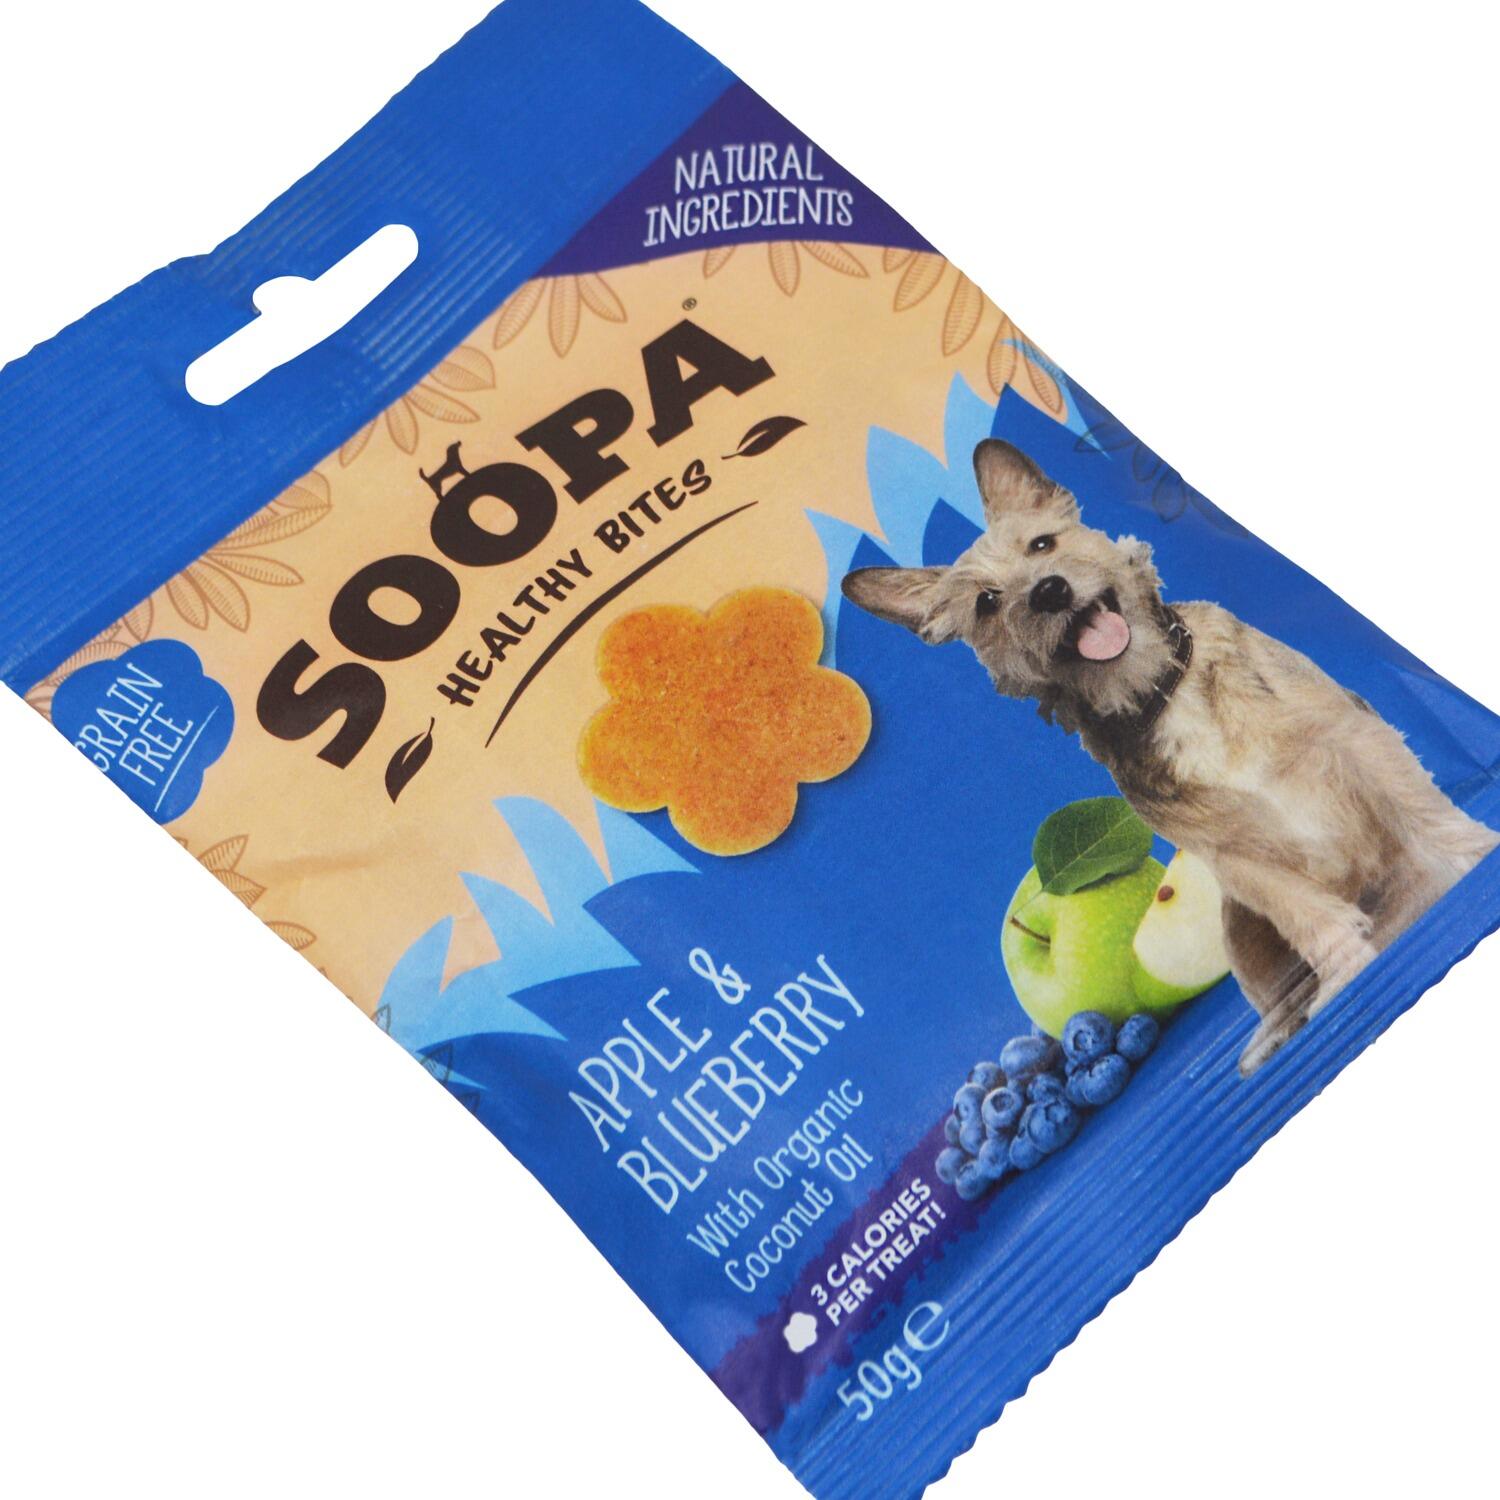 An angled pack of Soopa Apple and Blueberry Plant Based low Fat Dog Chews